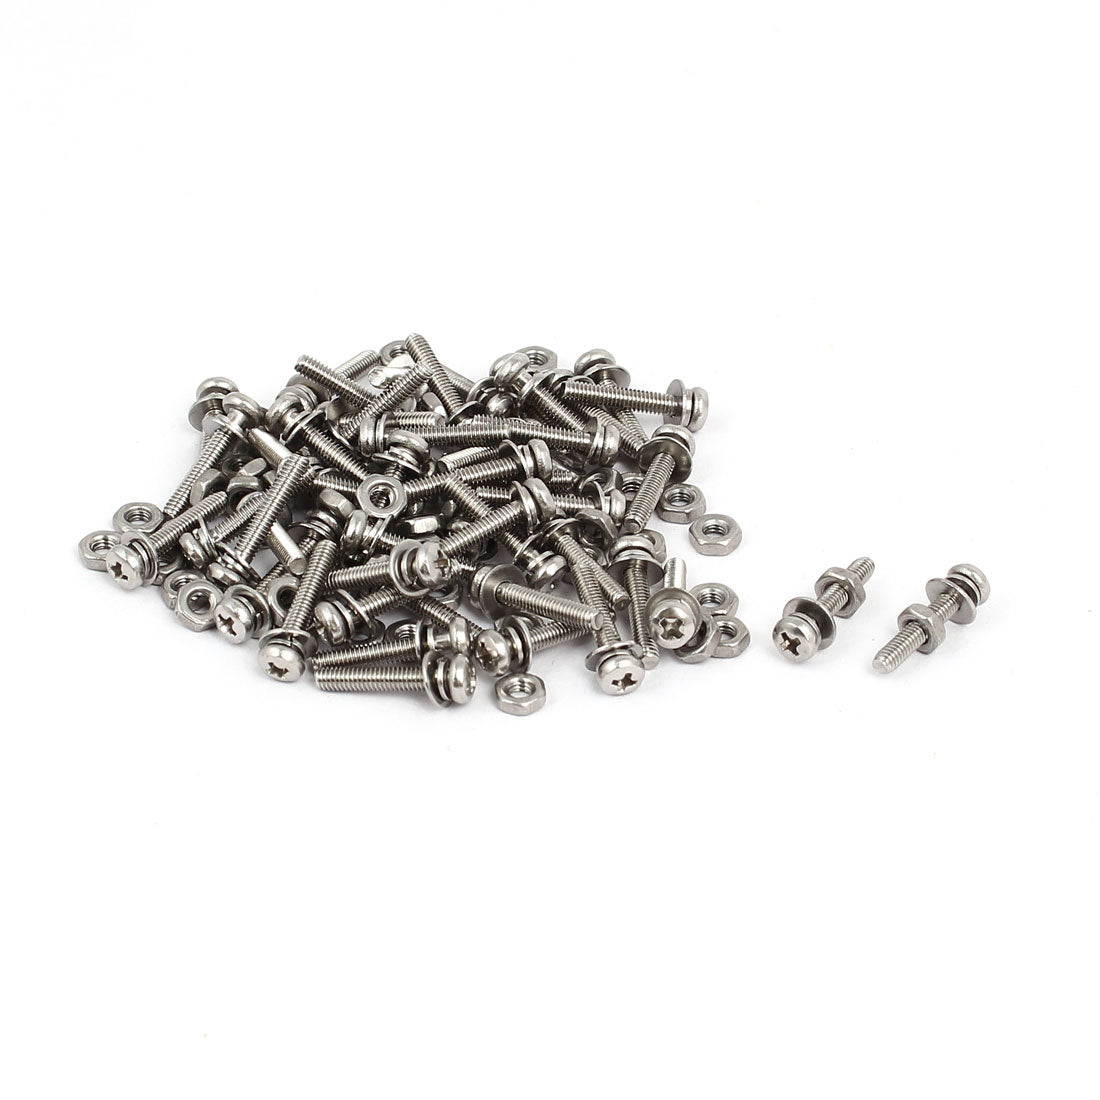 uxcell Uxcell M2.5 x 14mm 304 Stainless Steel Phillips Pan Head Screws Nuts w Washers 50 Sets